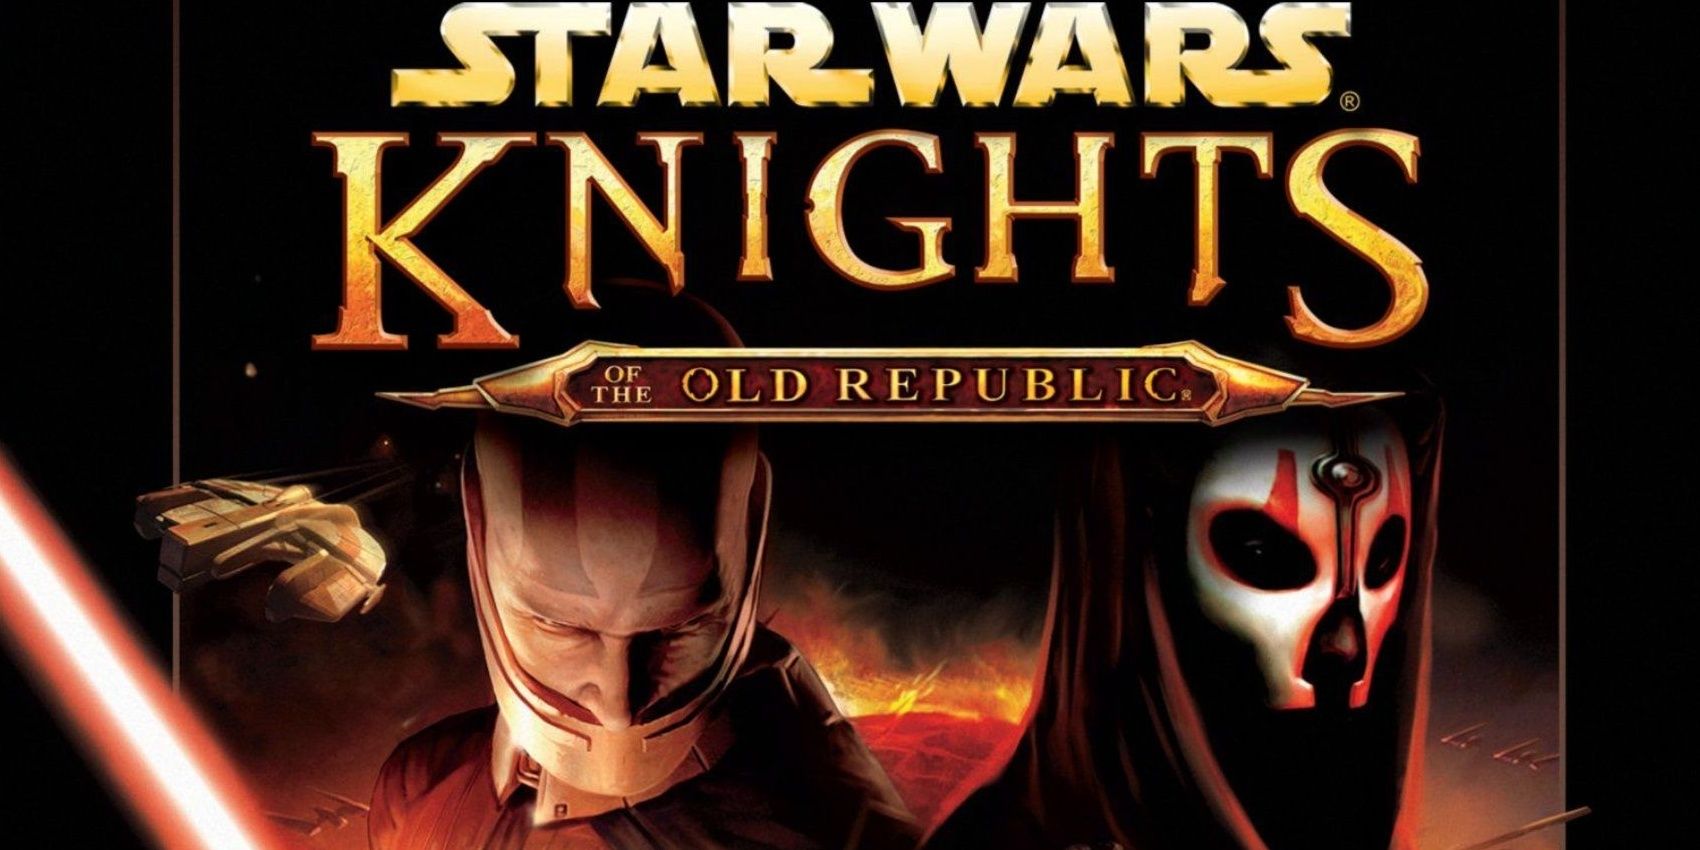 Cover art for the Knights of the Old Republic Collection